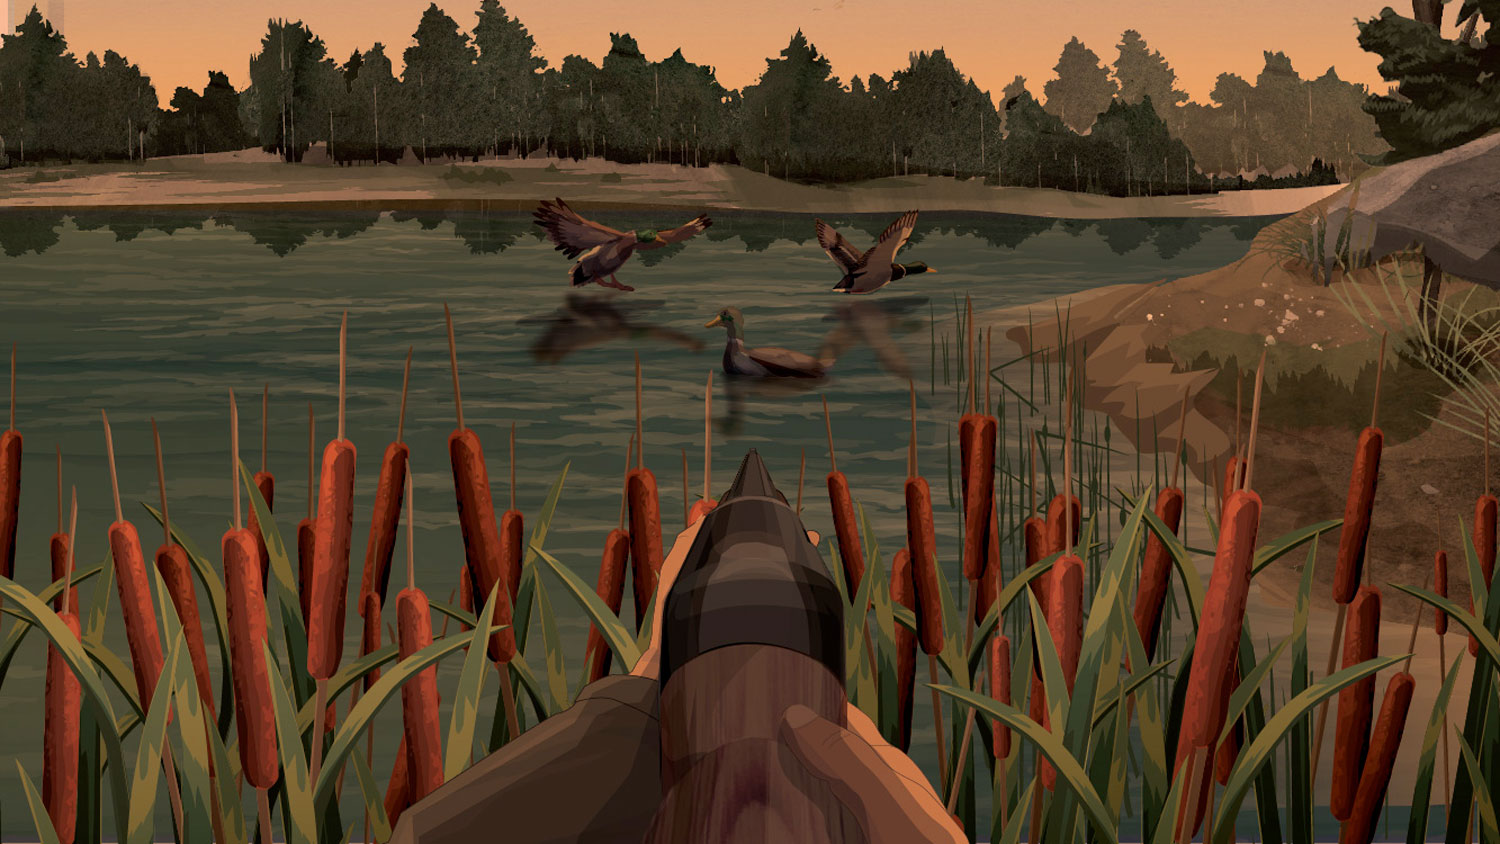 Illustration of a hunter's hands holding a forward facing firearm aimed at ducks on a body of water.